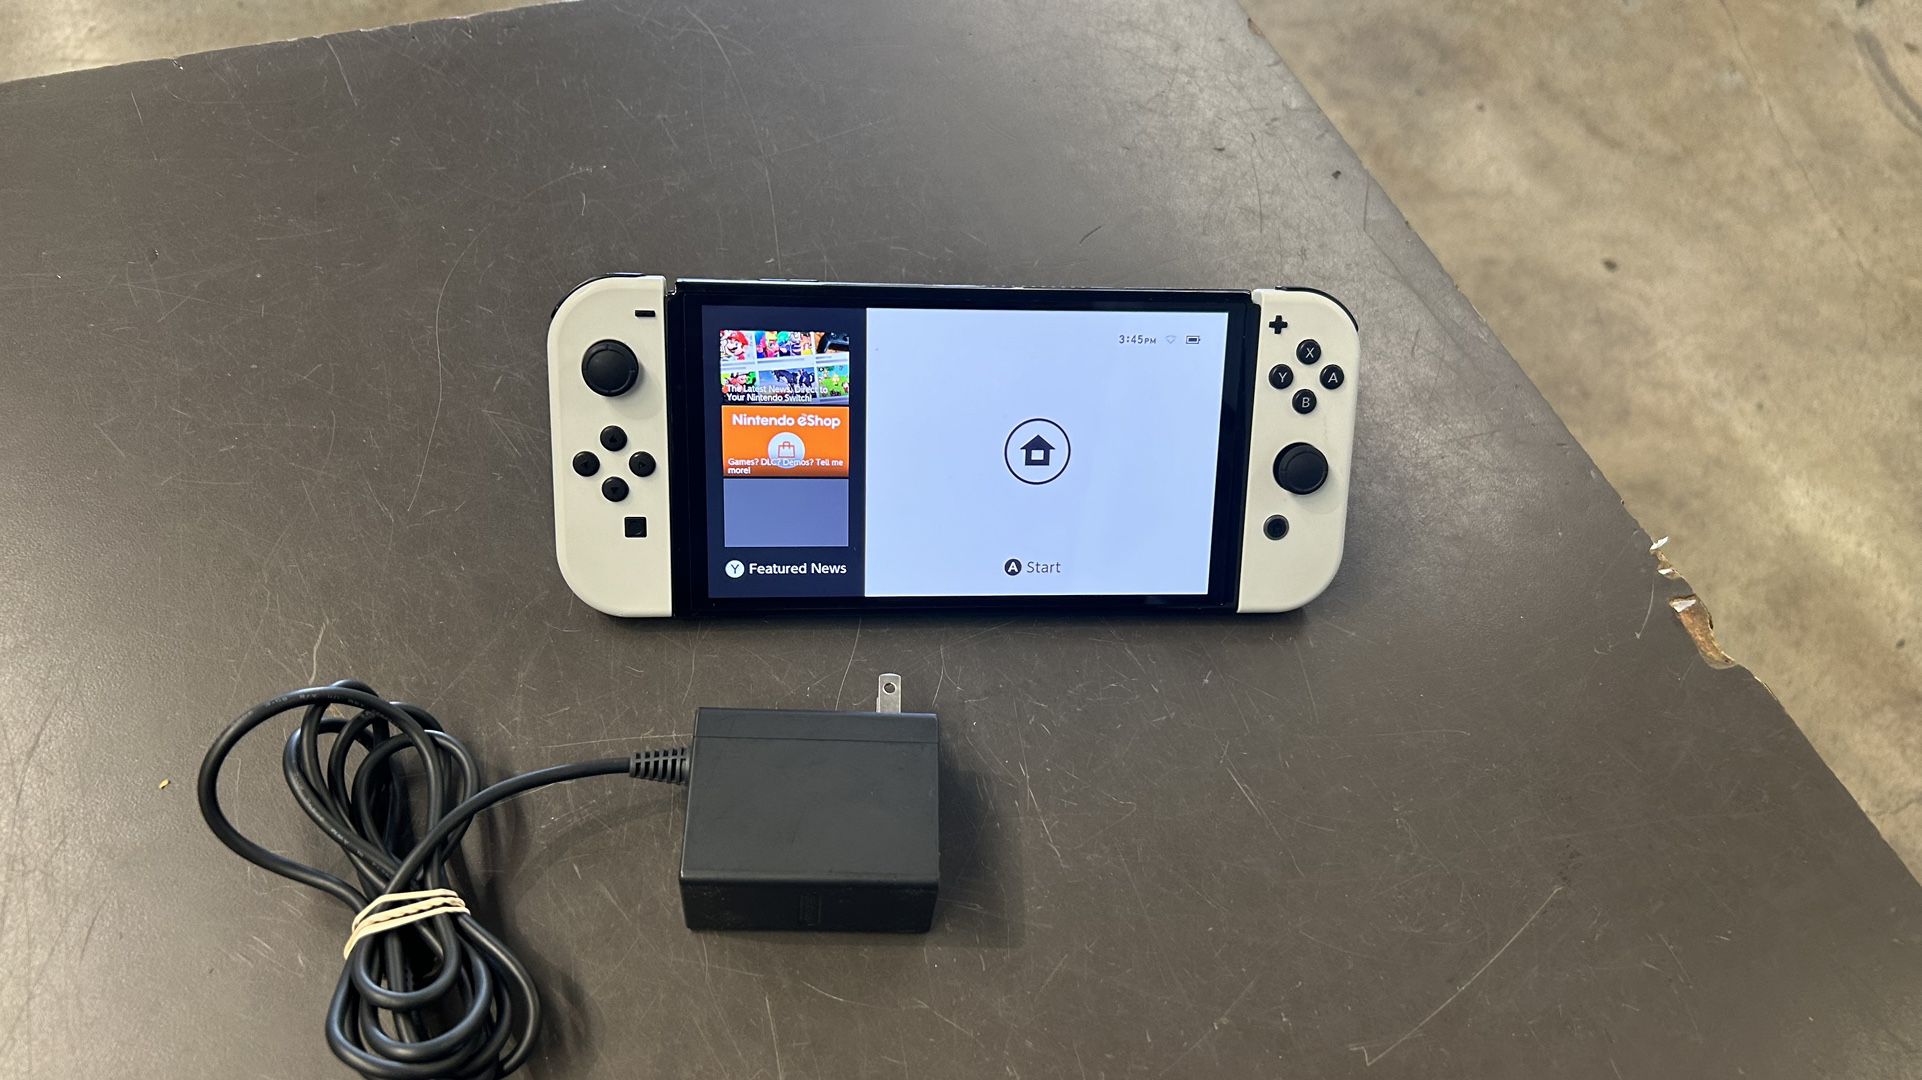 Nintendo Switch OLED w chwrger no dock station no trades pick up in Tacoma FIRM PRICE